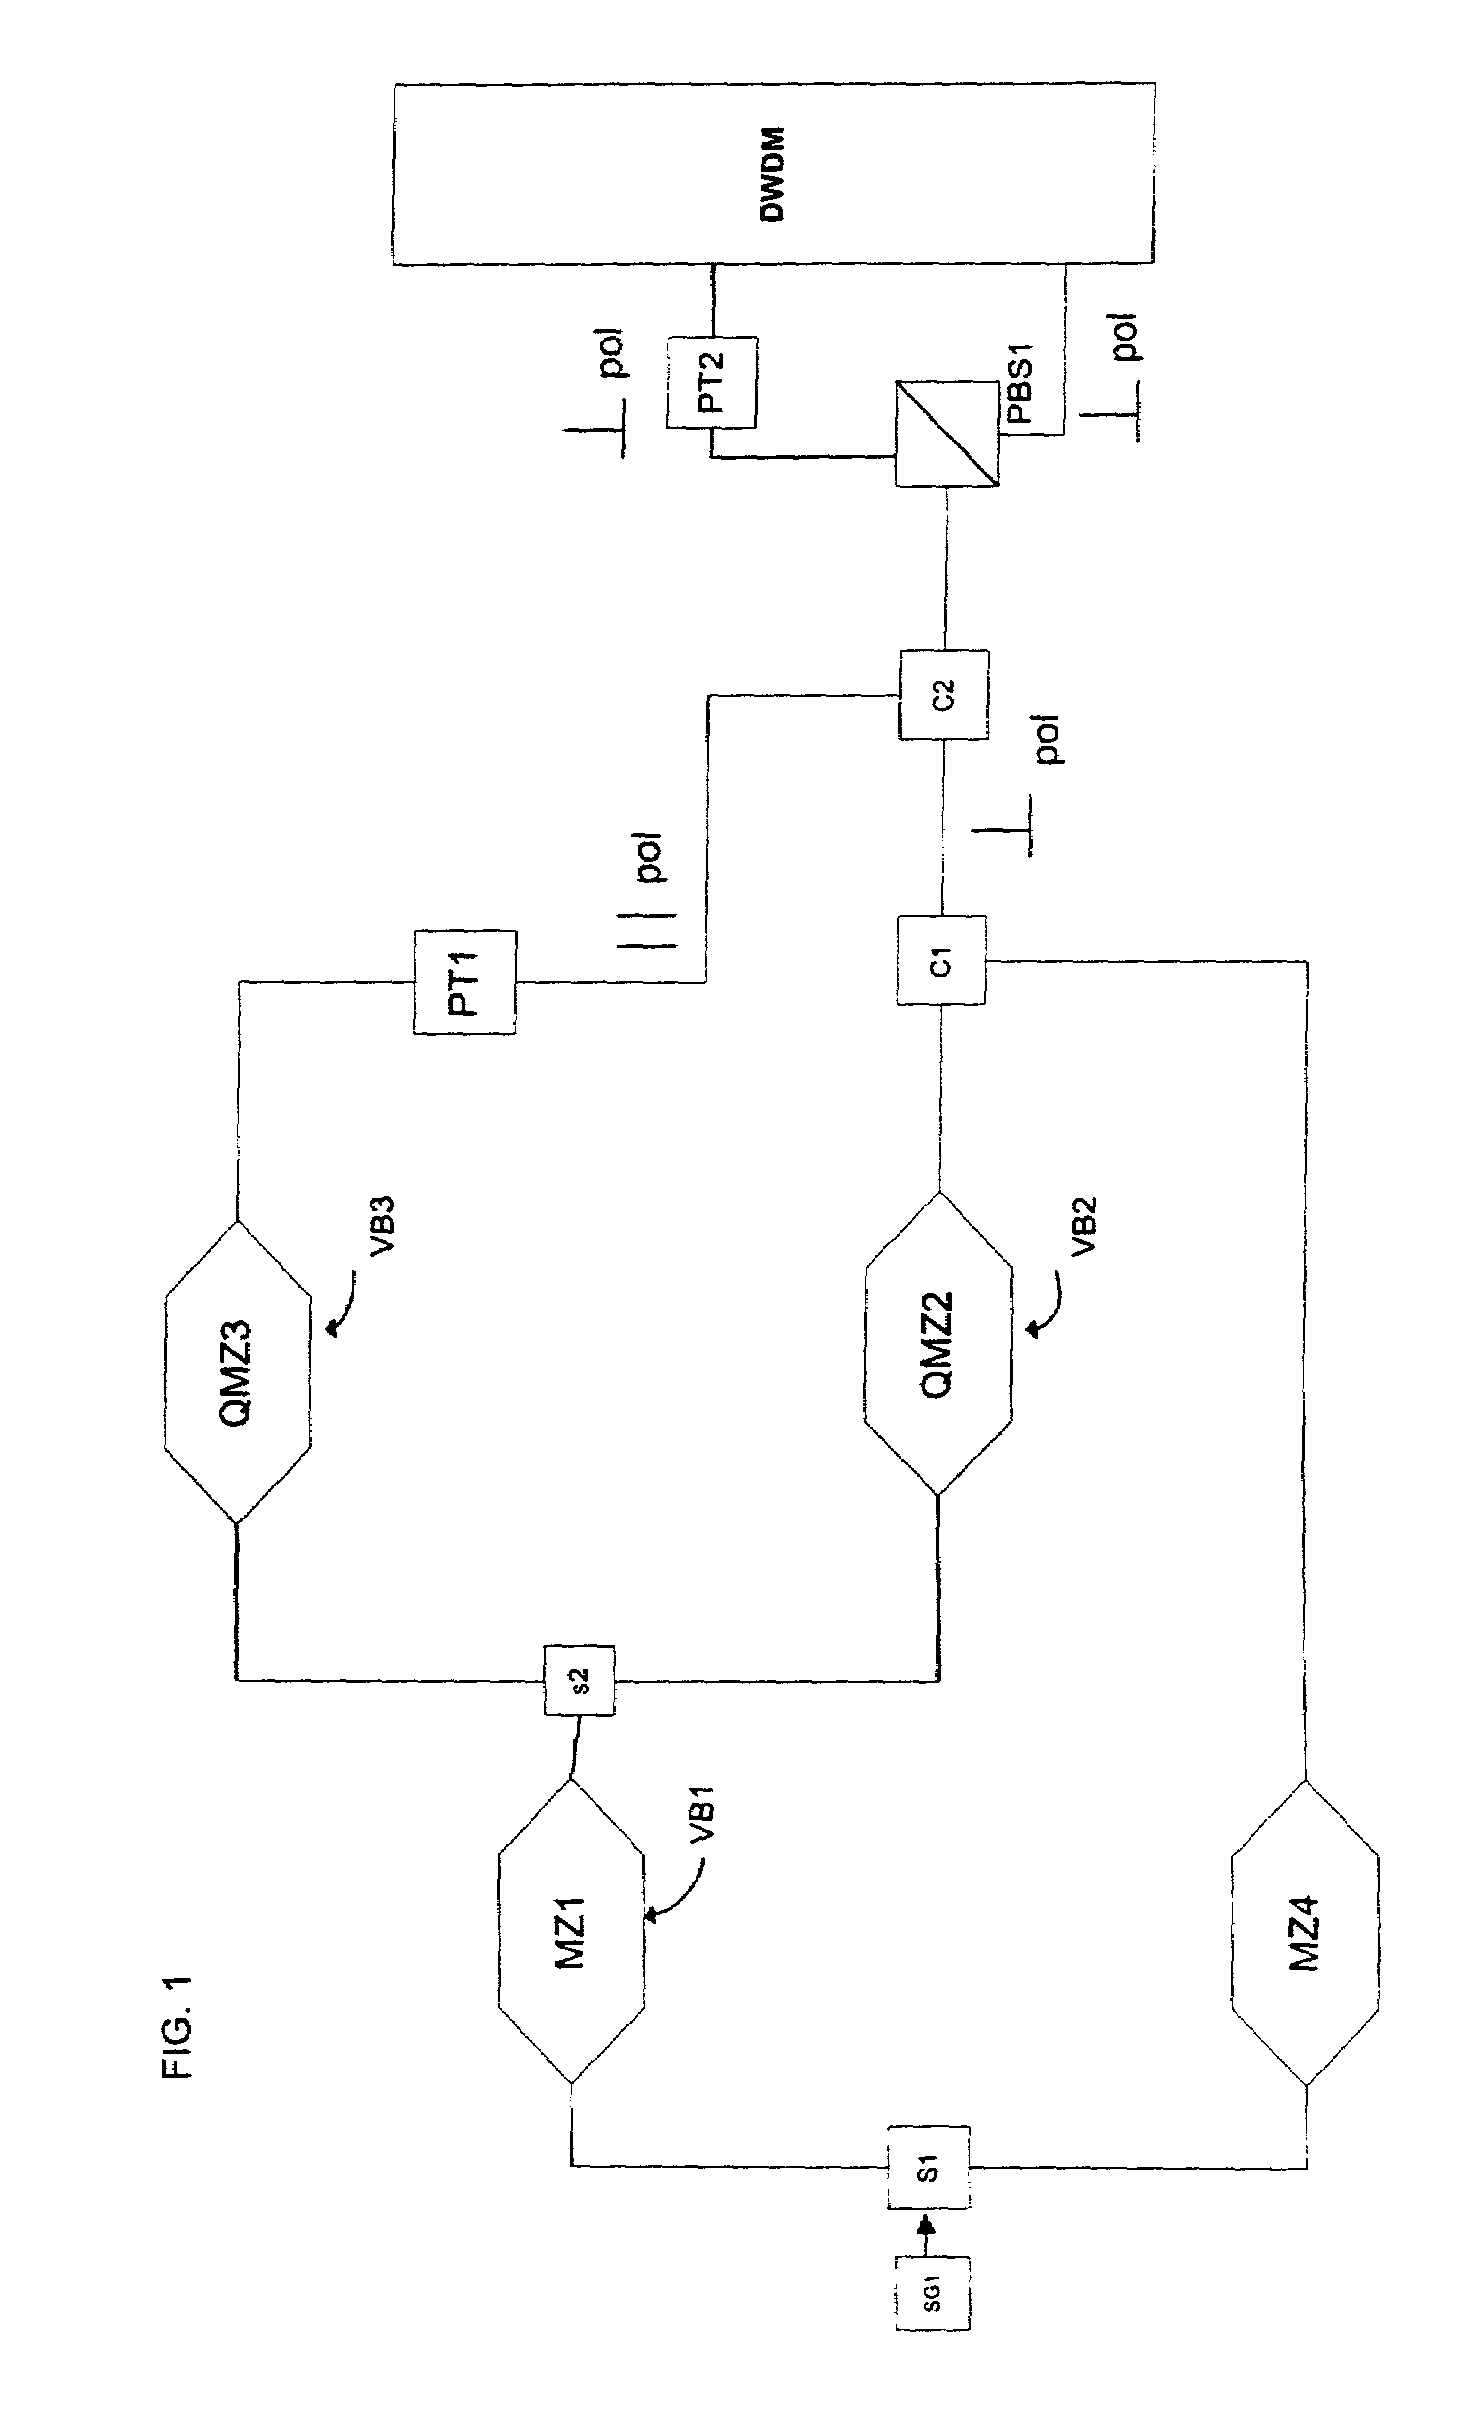 Method and system for a polarization mode dispersion tolerant optical homodyne detection system with optimized transmission modulation